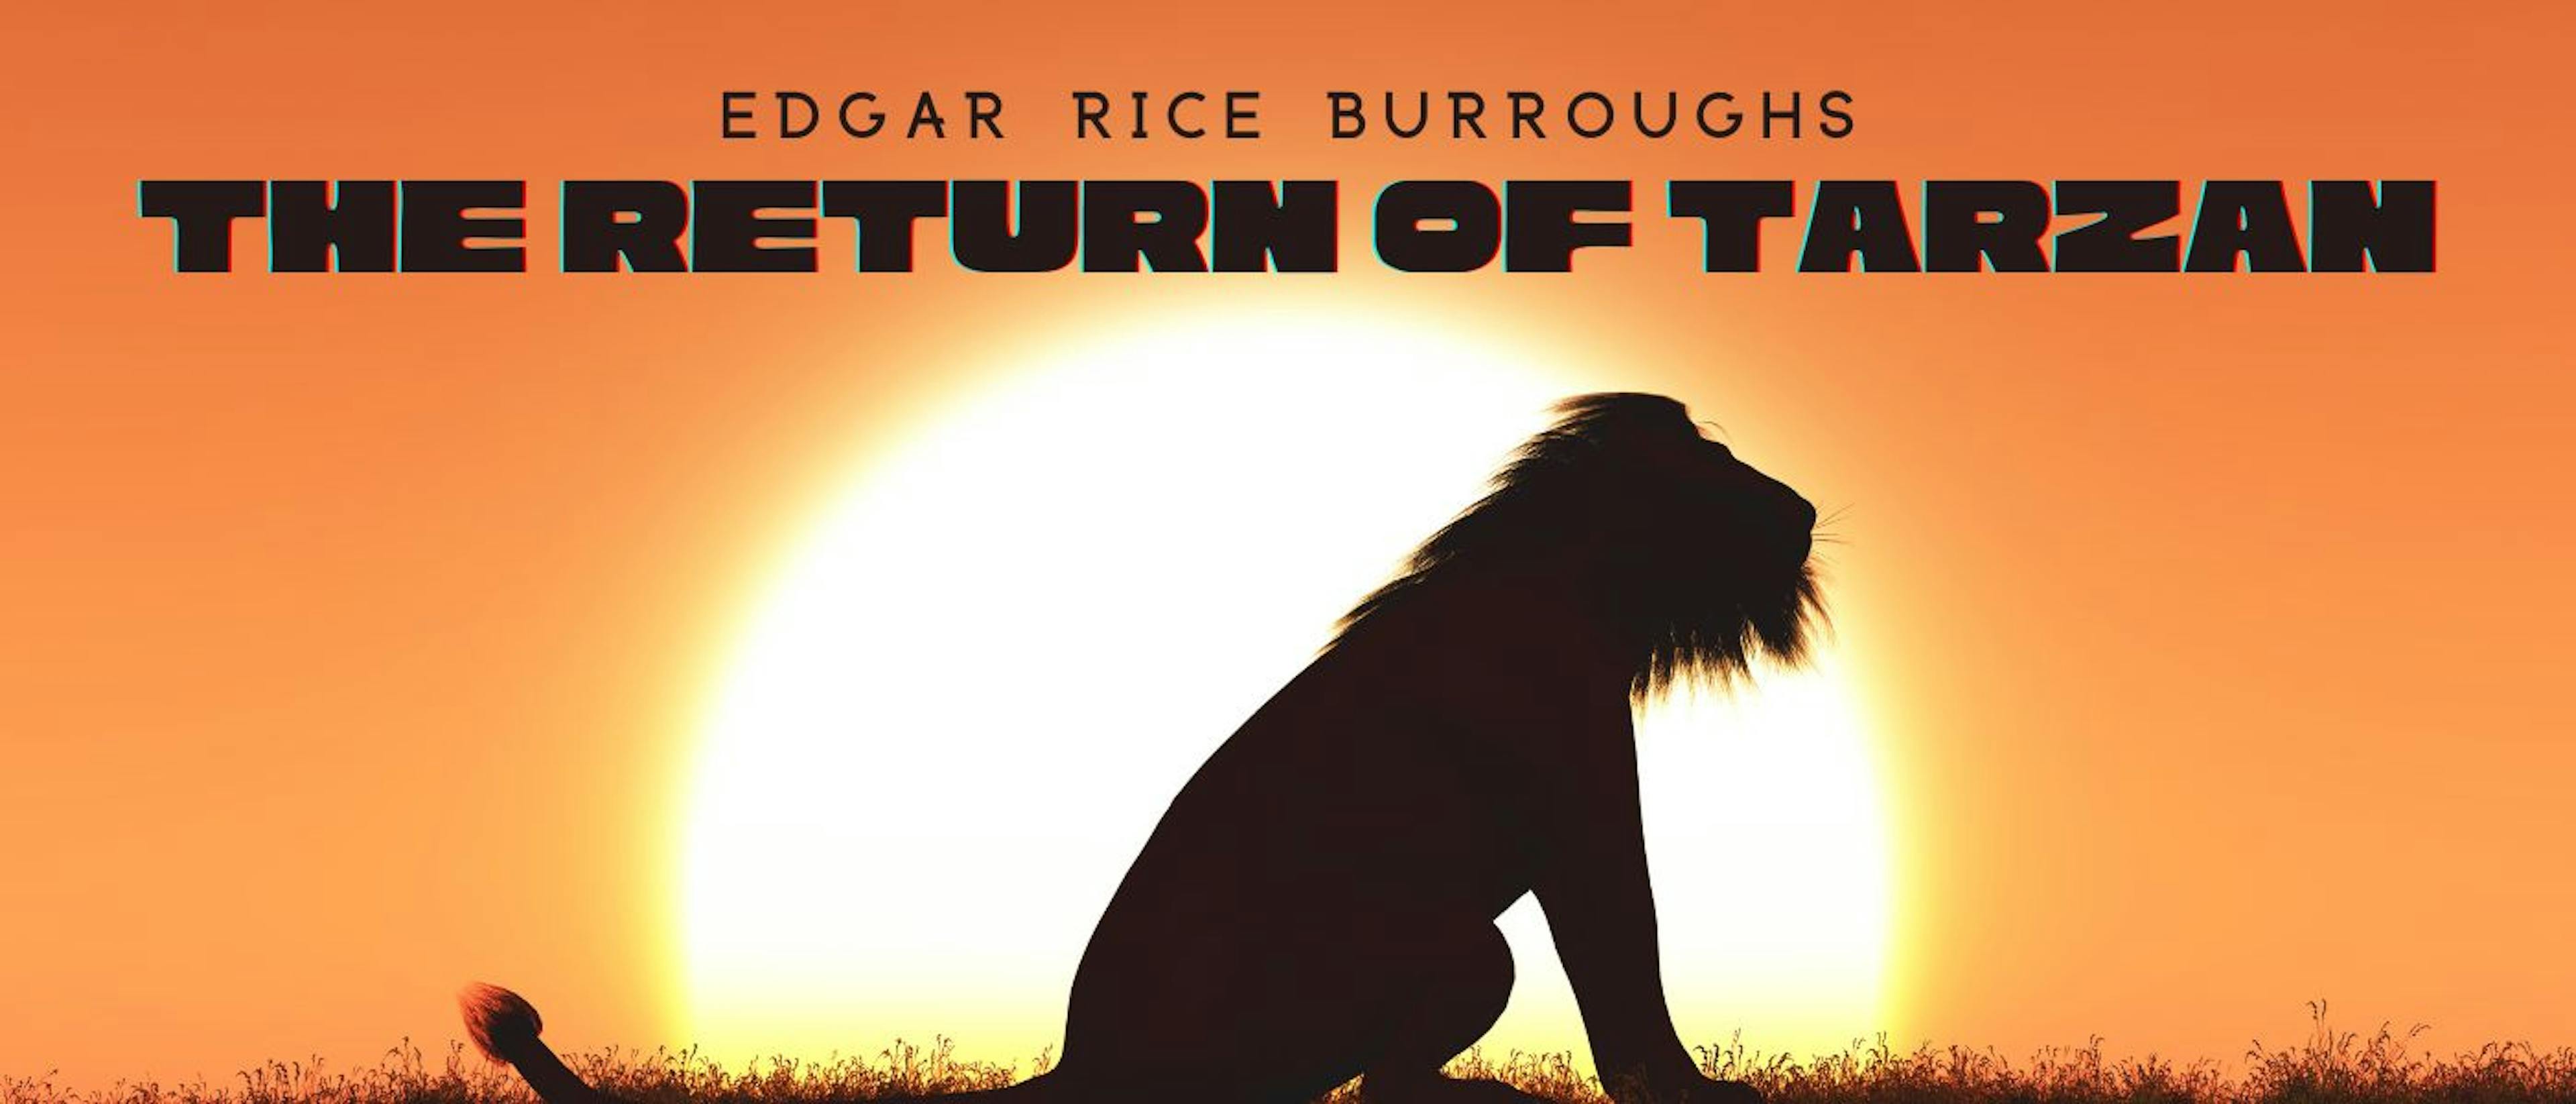 featured image - The Return of Tarzan by Edgar Rice Burroughs - Table of Links